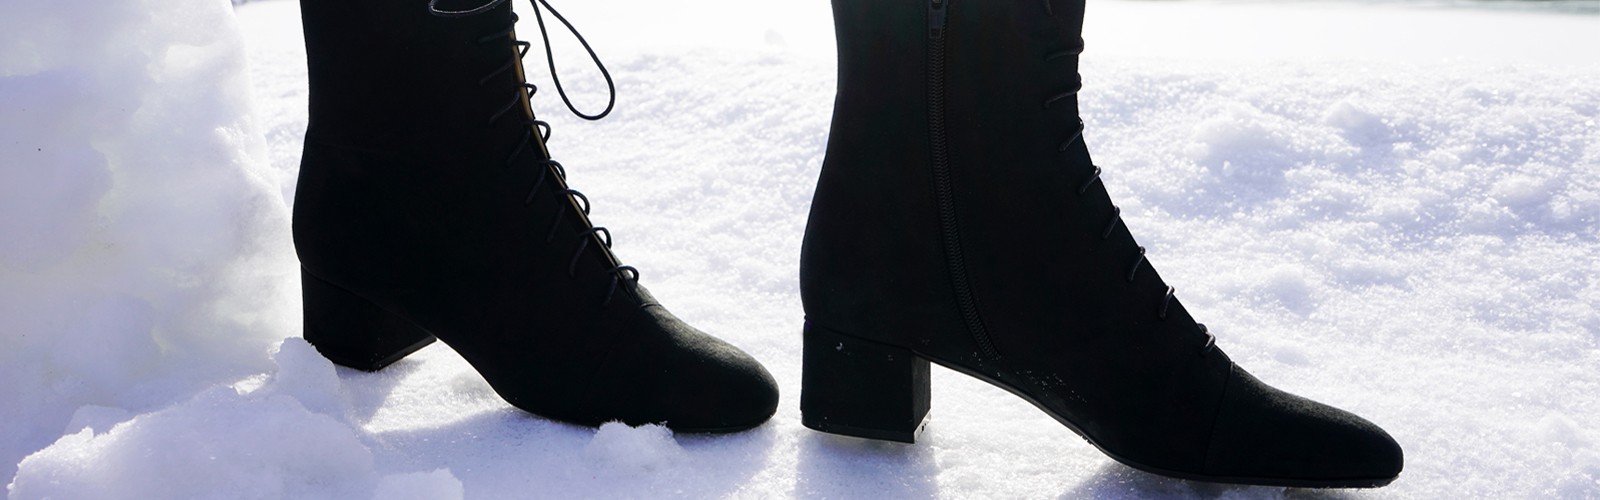 Vegan shoes and boots for the cold season